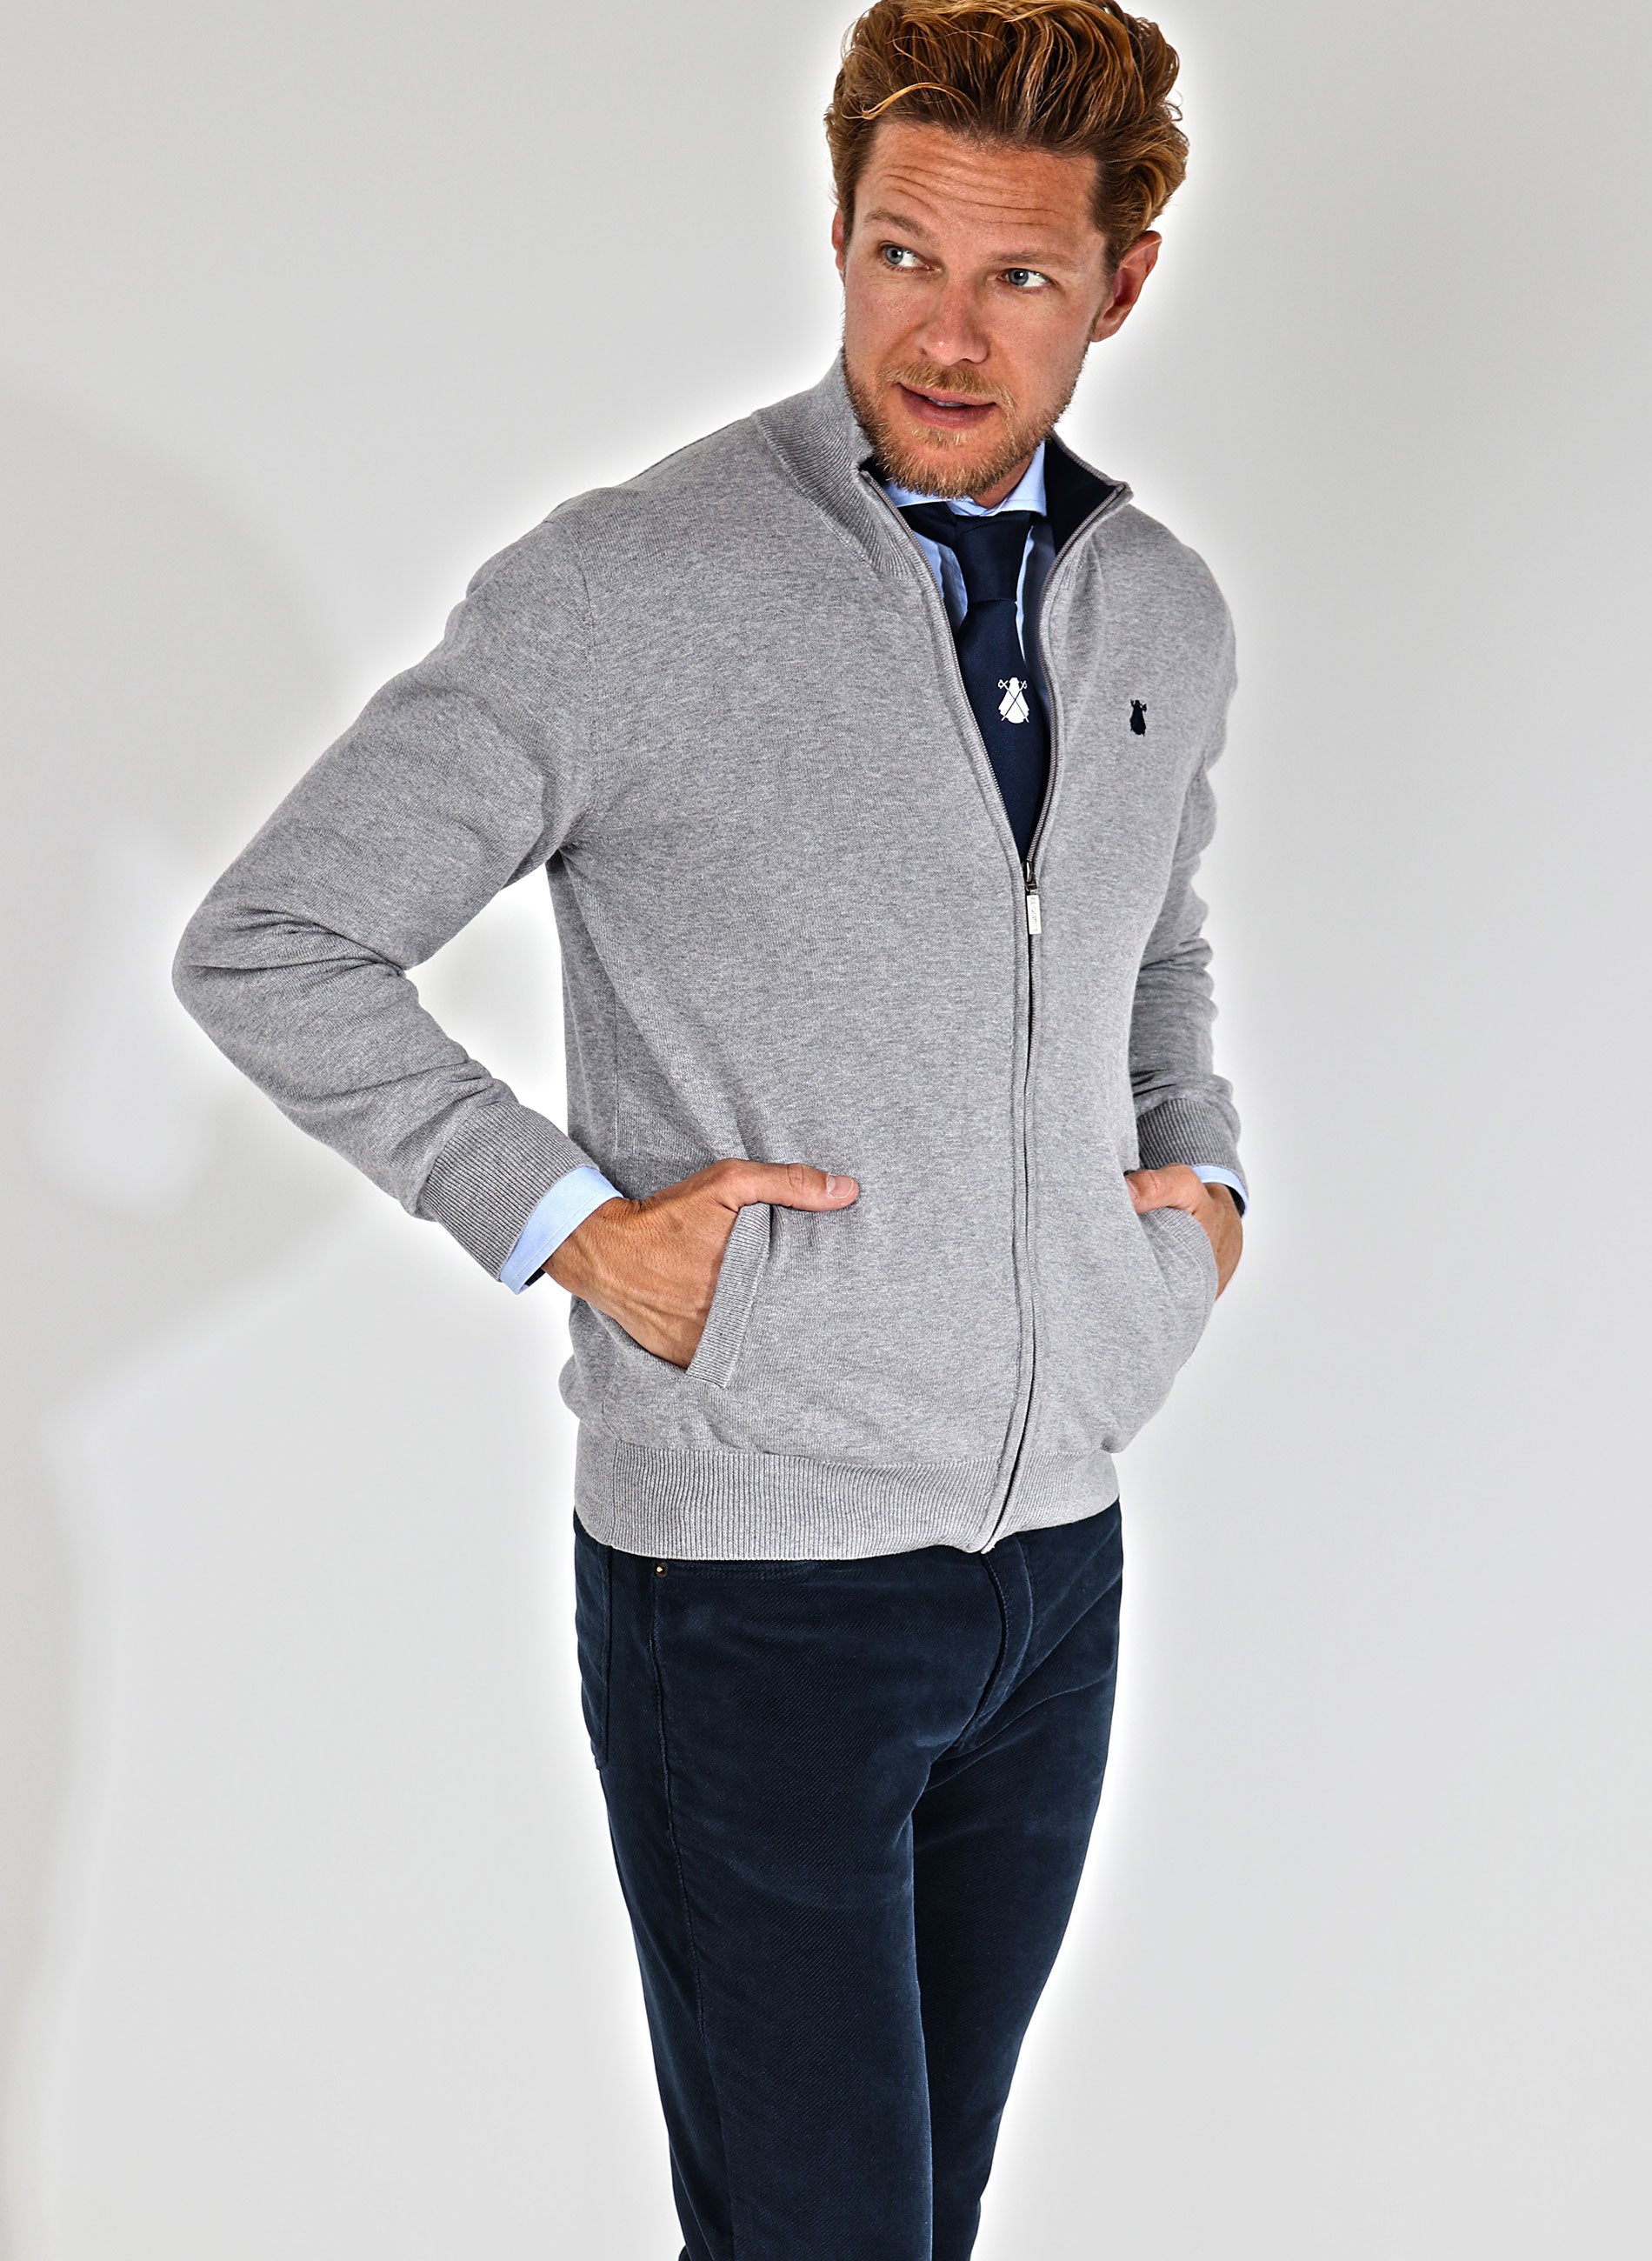 Men's Gray Knitted Jacket with Zipper